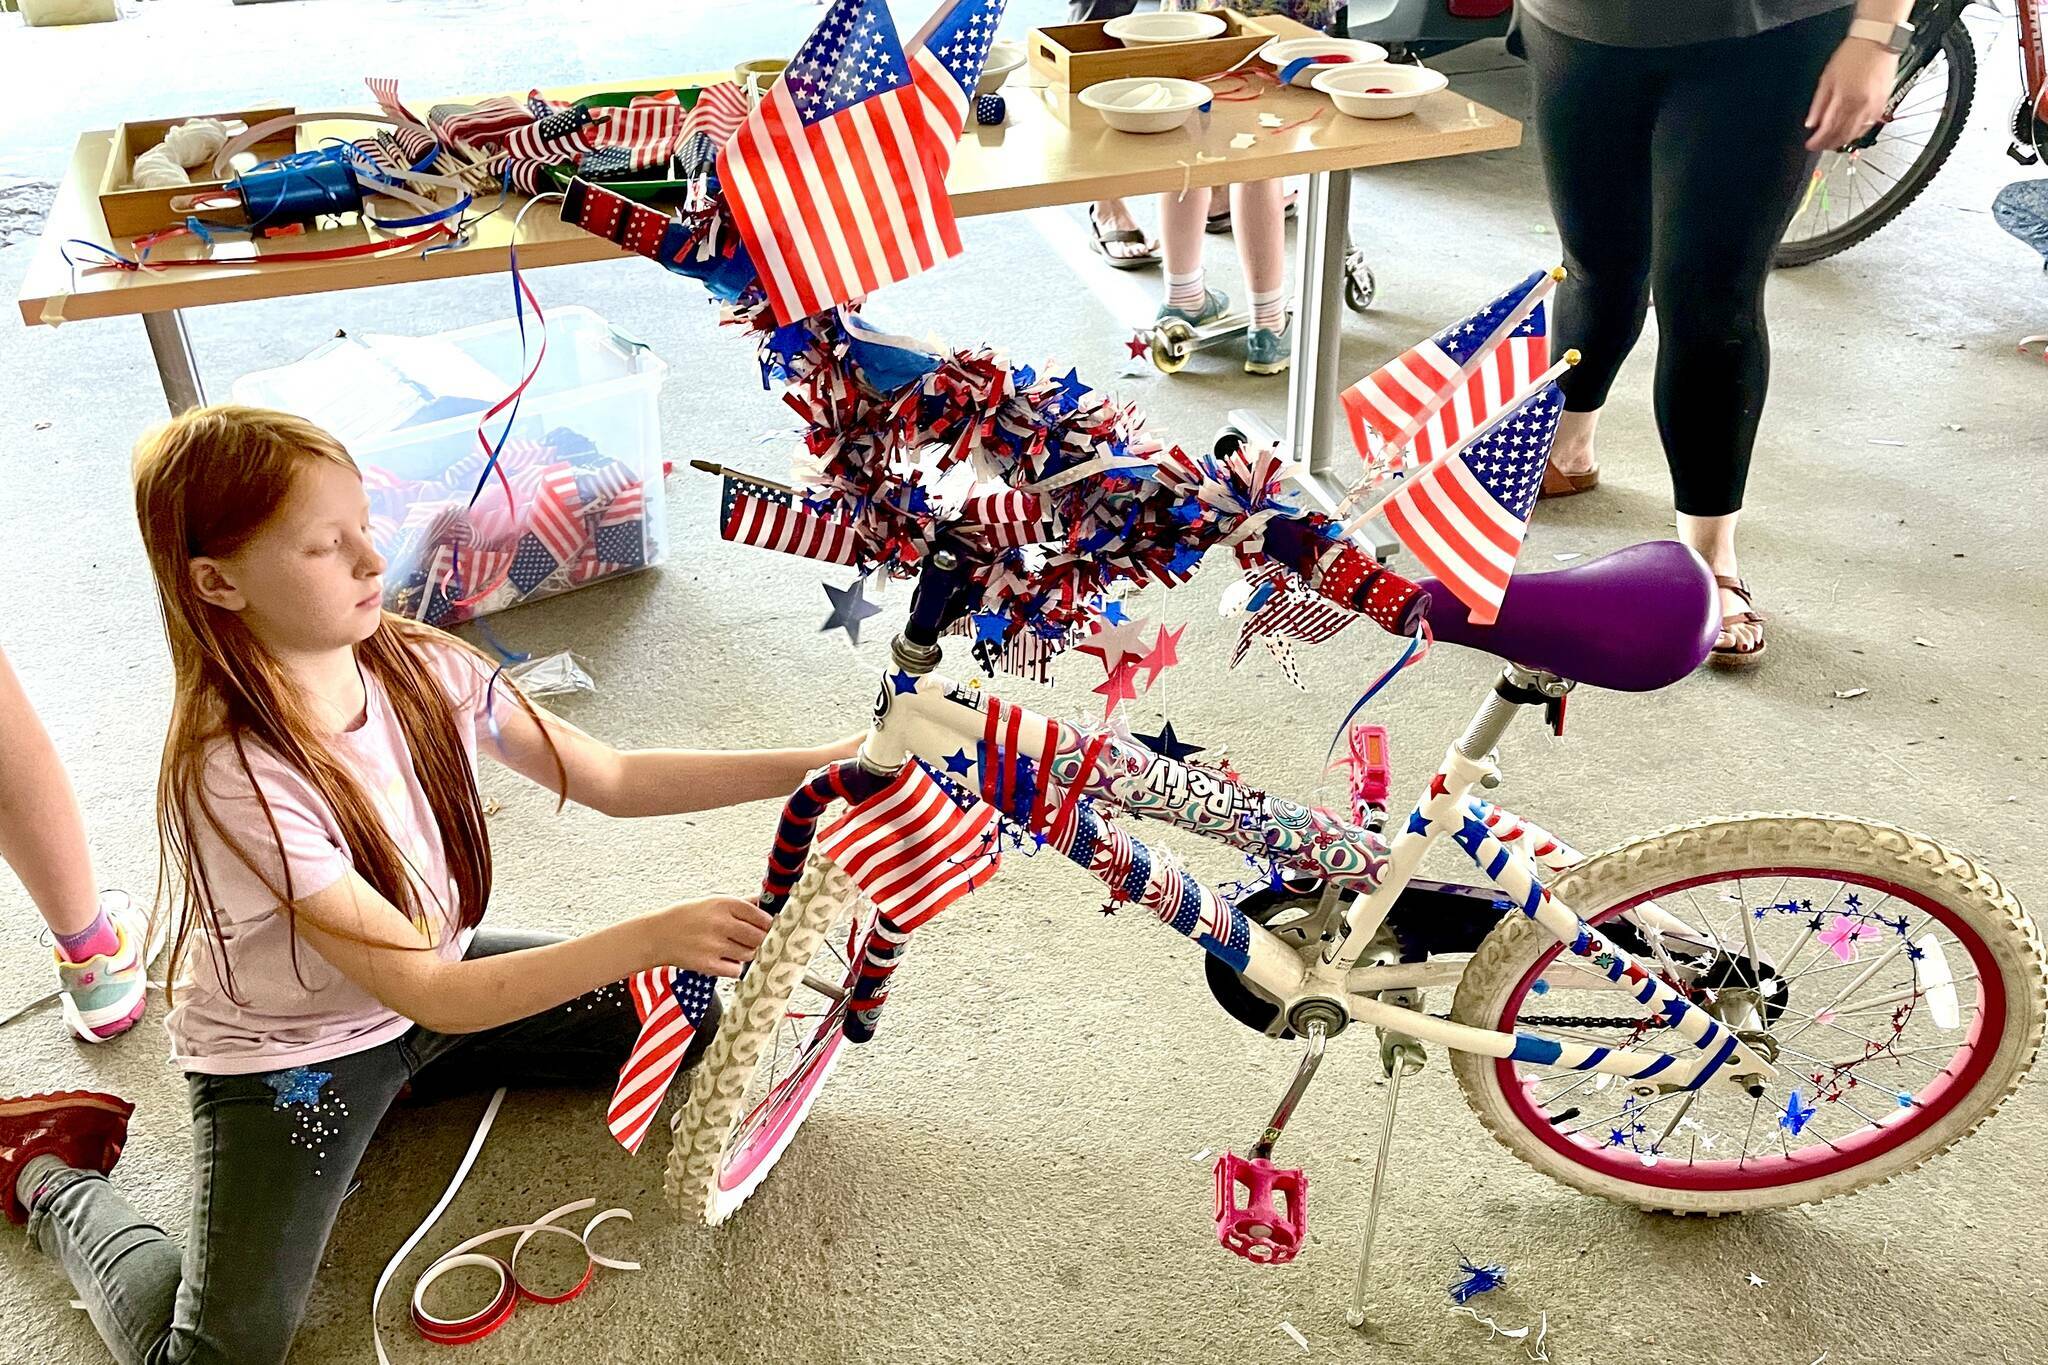 Michael S. Lockett / Juneau Empire File
Aoibhinn Reetz executes her creative vision for her bike during the Douglas Fourth of July Committee’s annual Bicycle Decorating session held at the Douglas Public Library on July 2, 2022.